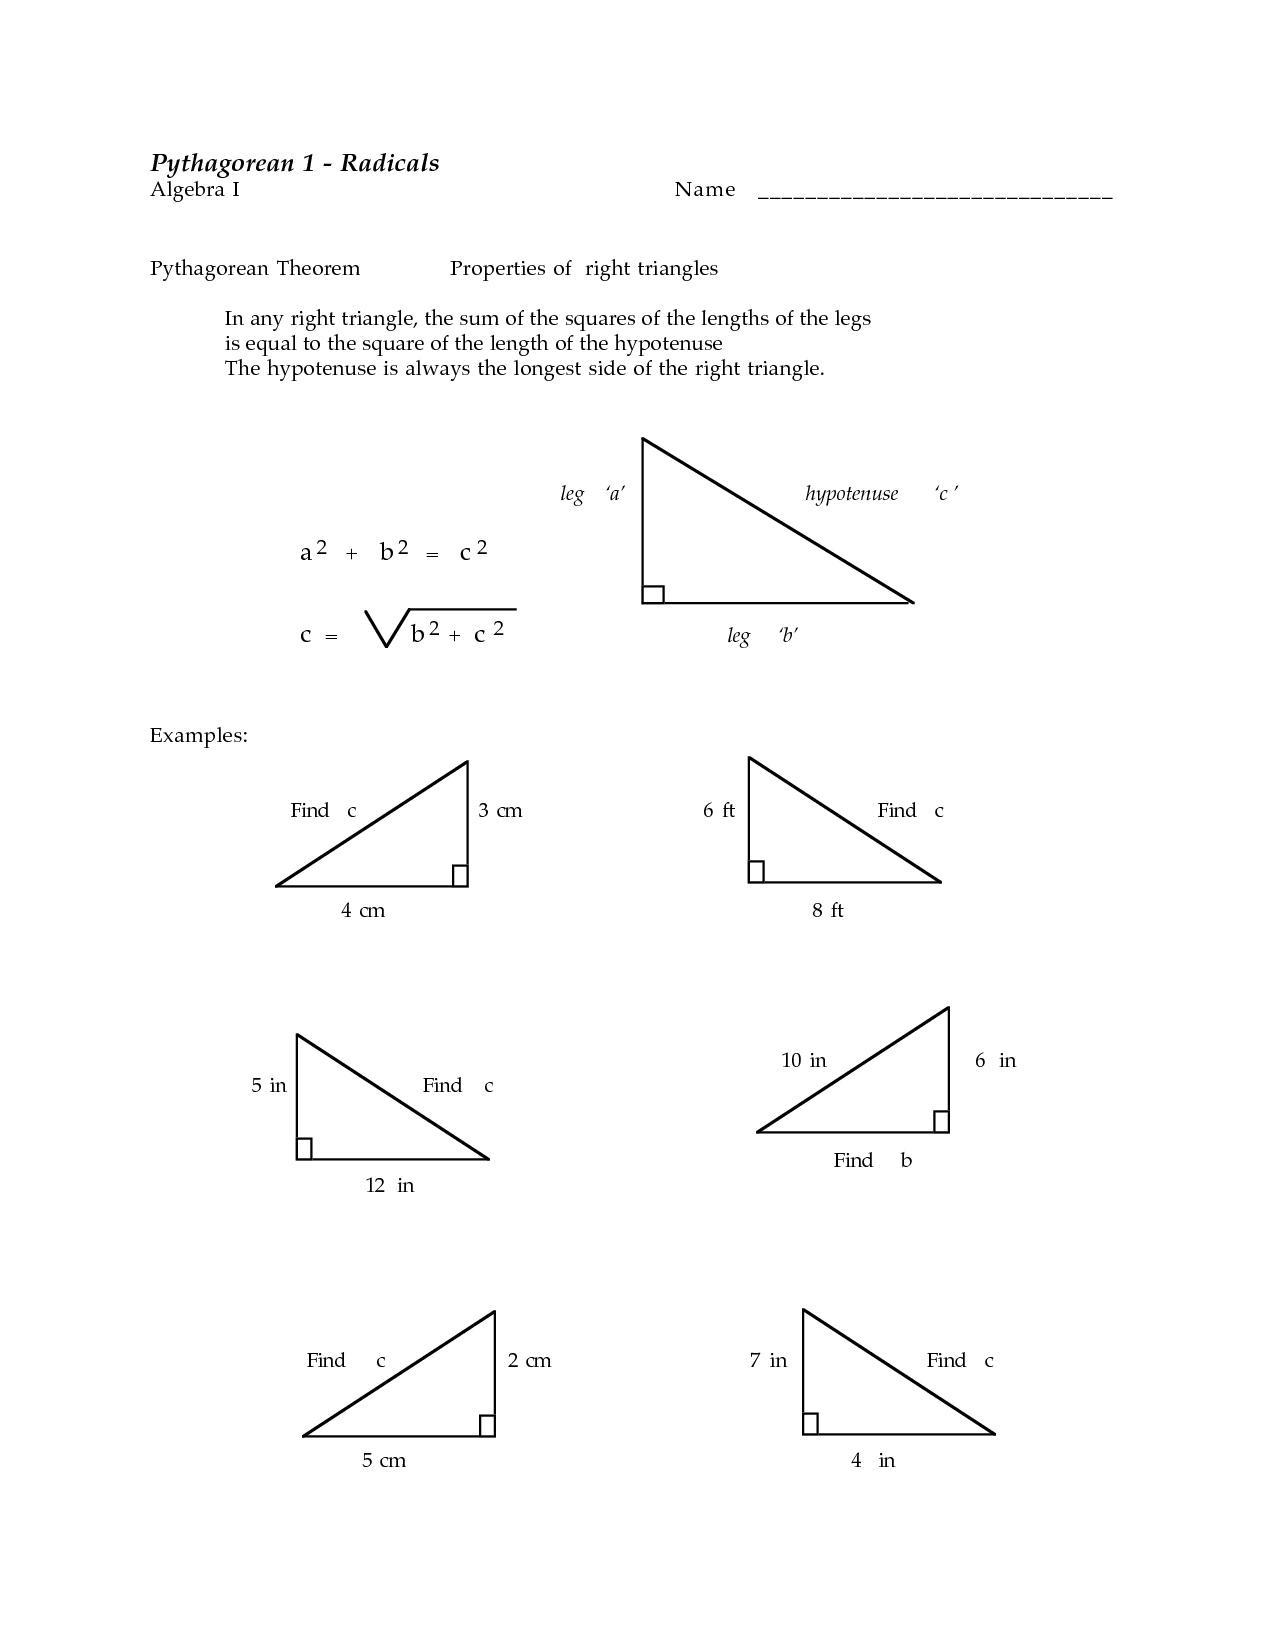 Right Triangle Pythagorean Theorem Worksheets Image